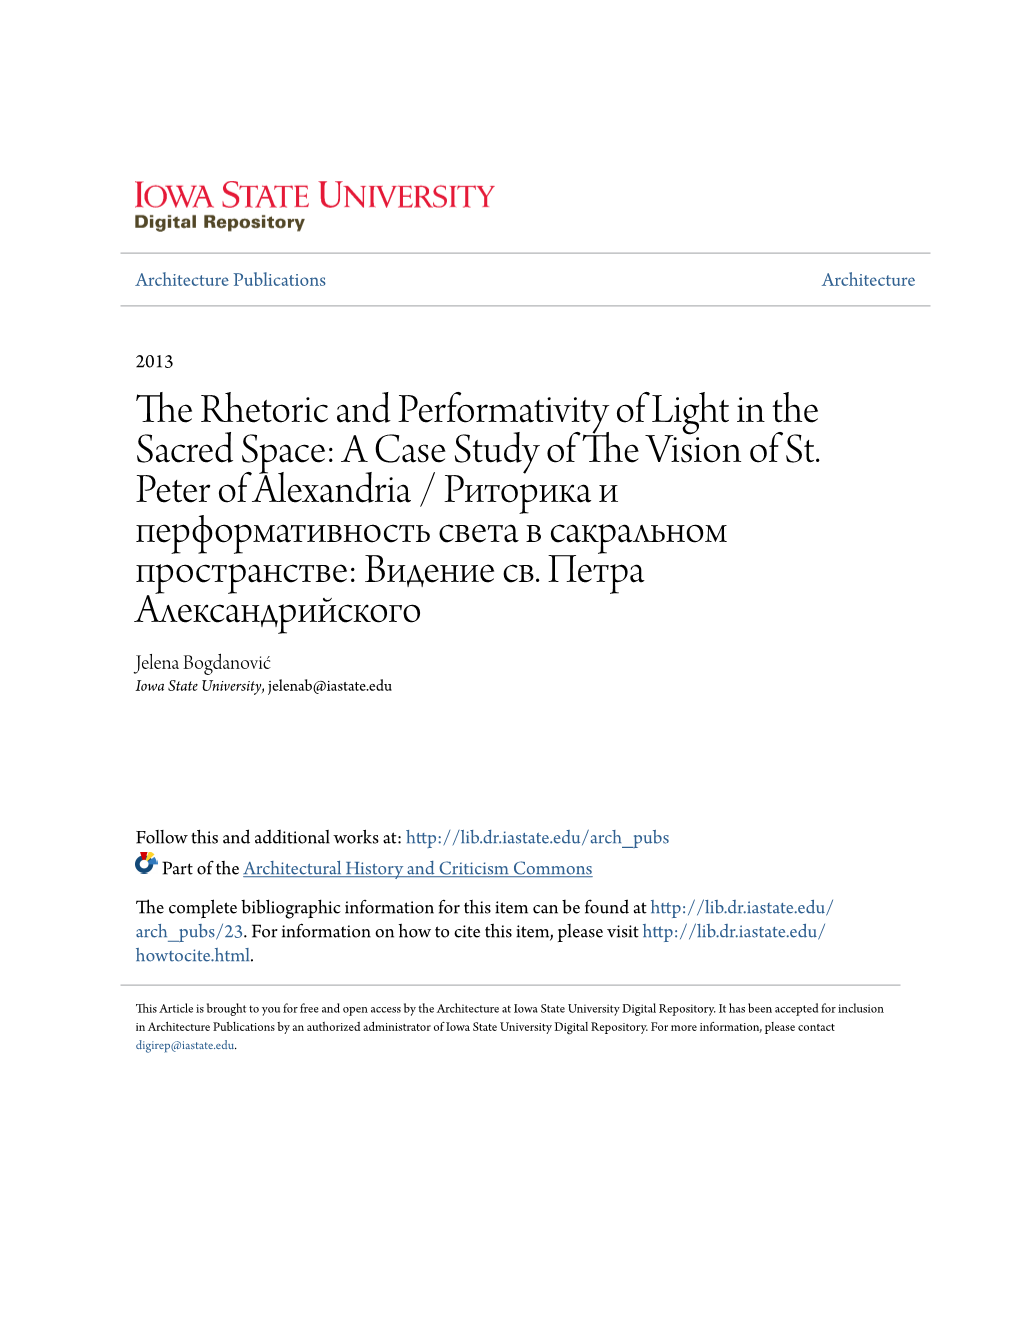 The Rhetoric and Performativity of Light in the Sacred Space: a Case Study of the Vision of St. Peter of Alexandria / Ð€Ð¸